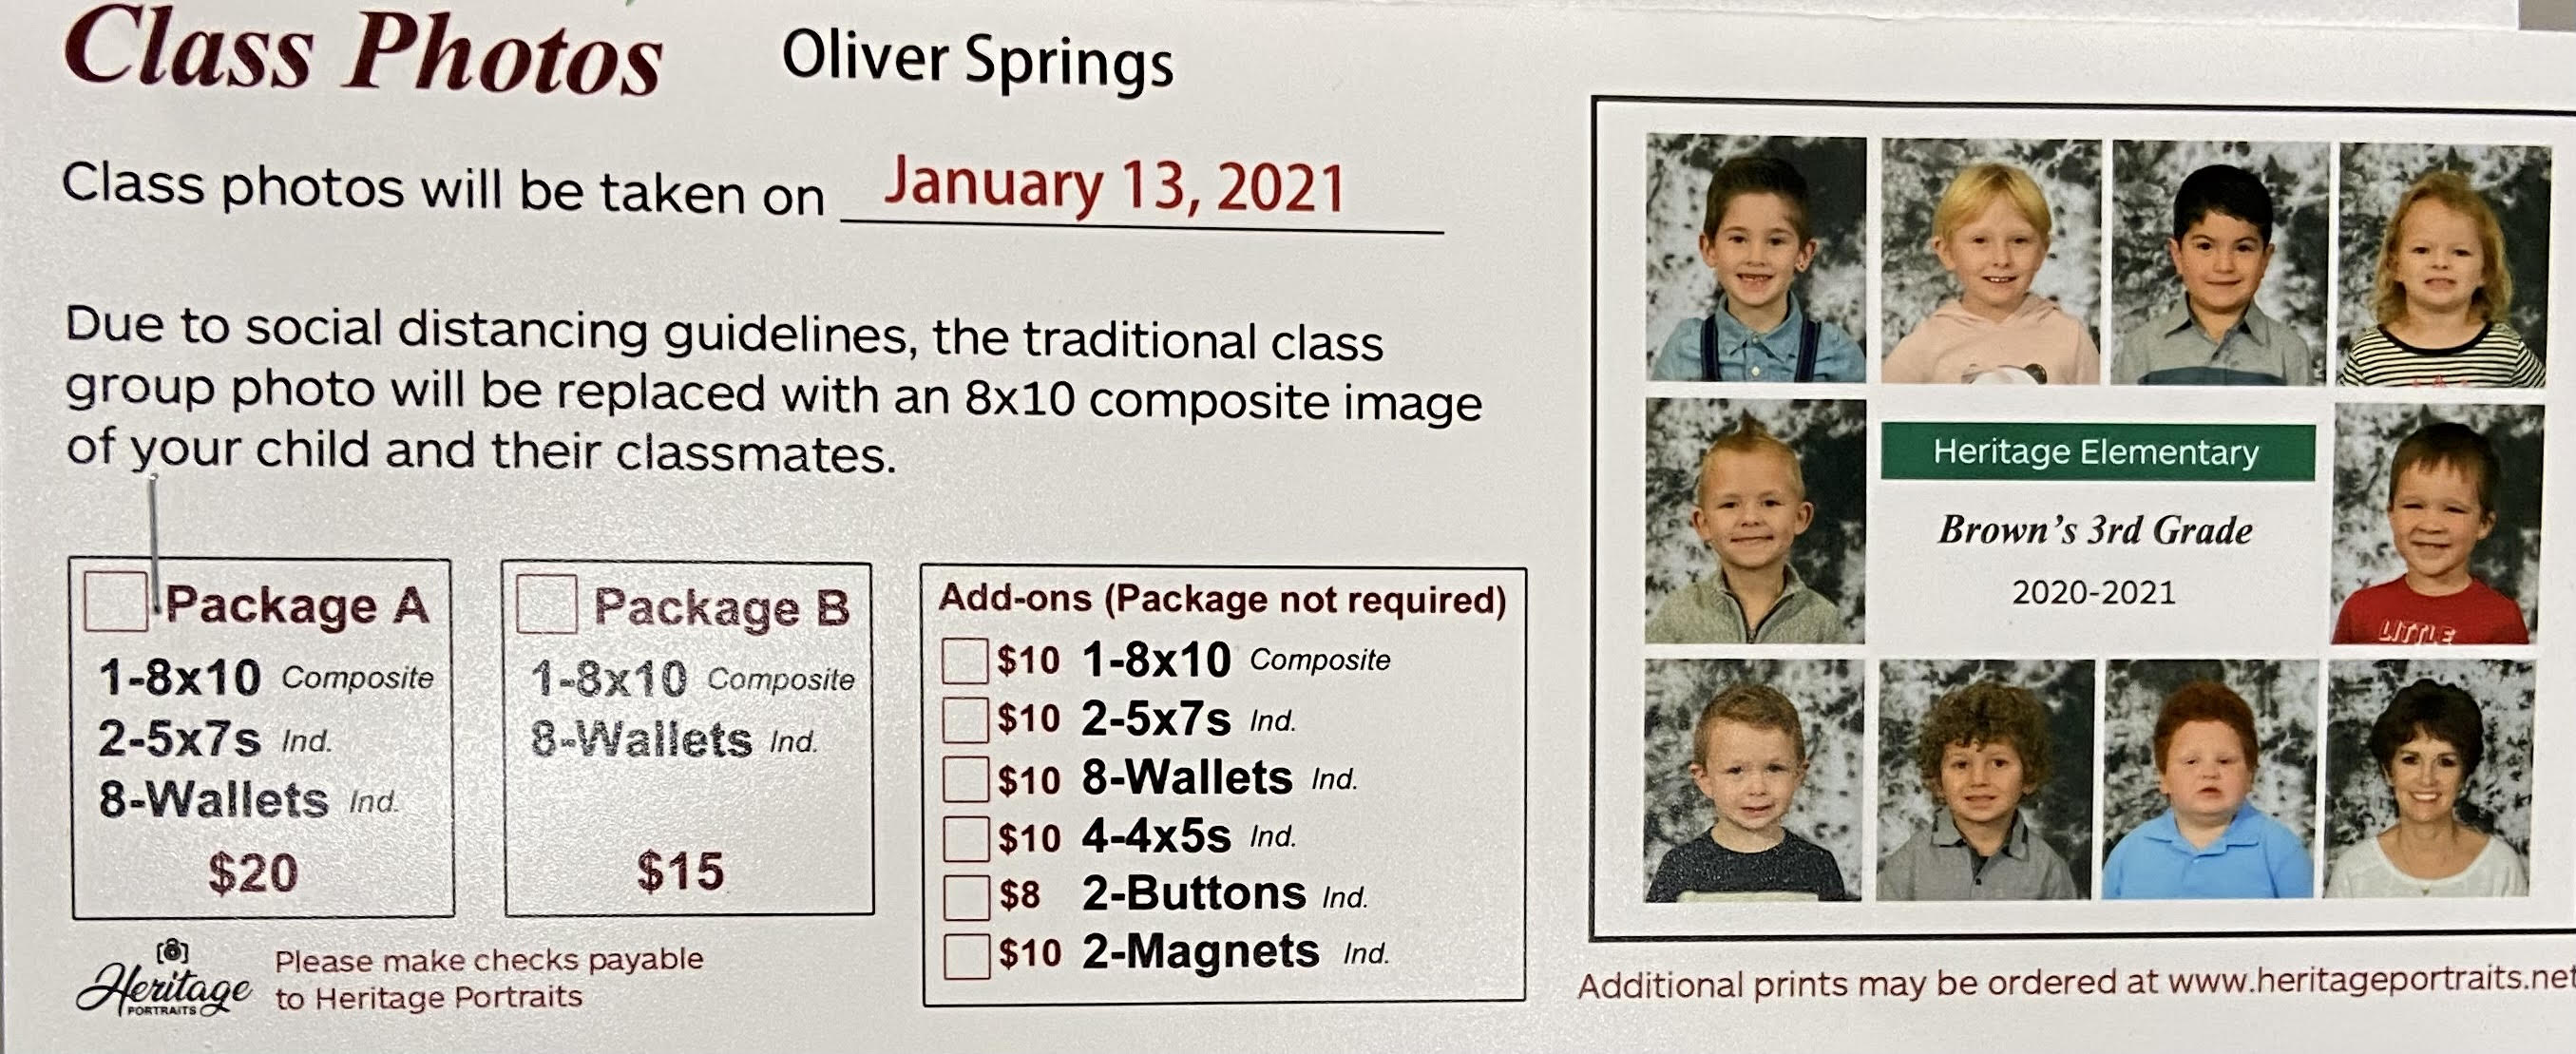 Class Pictures, Wed. 1/13